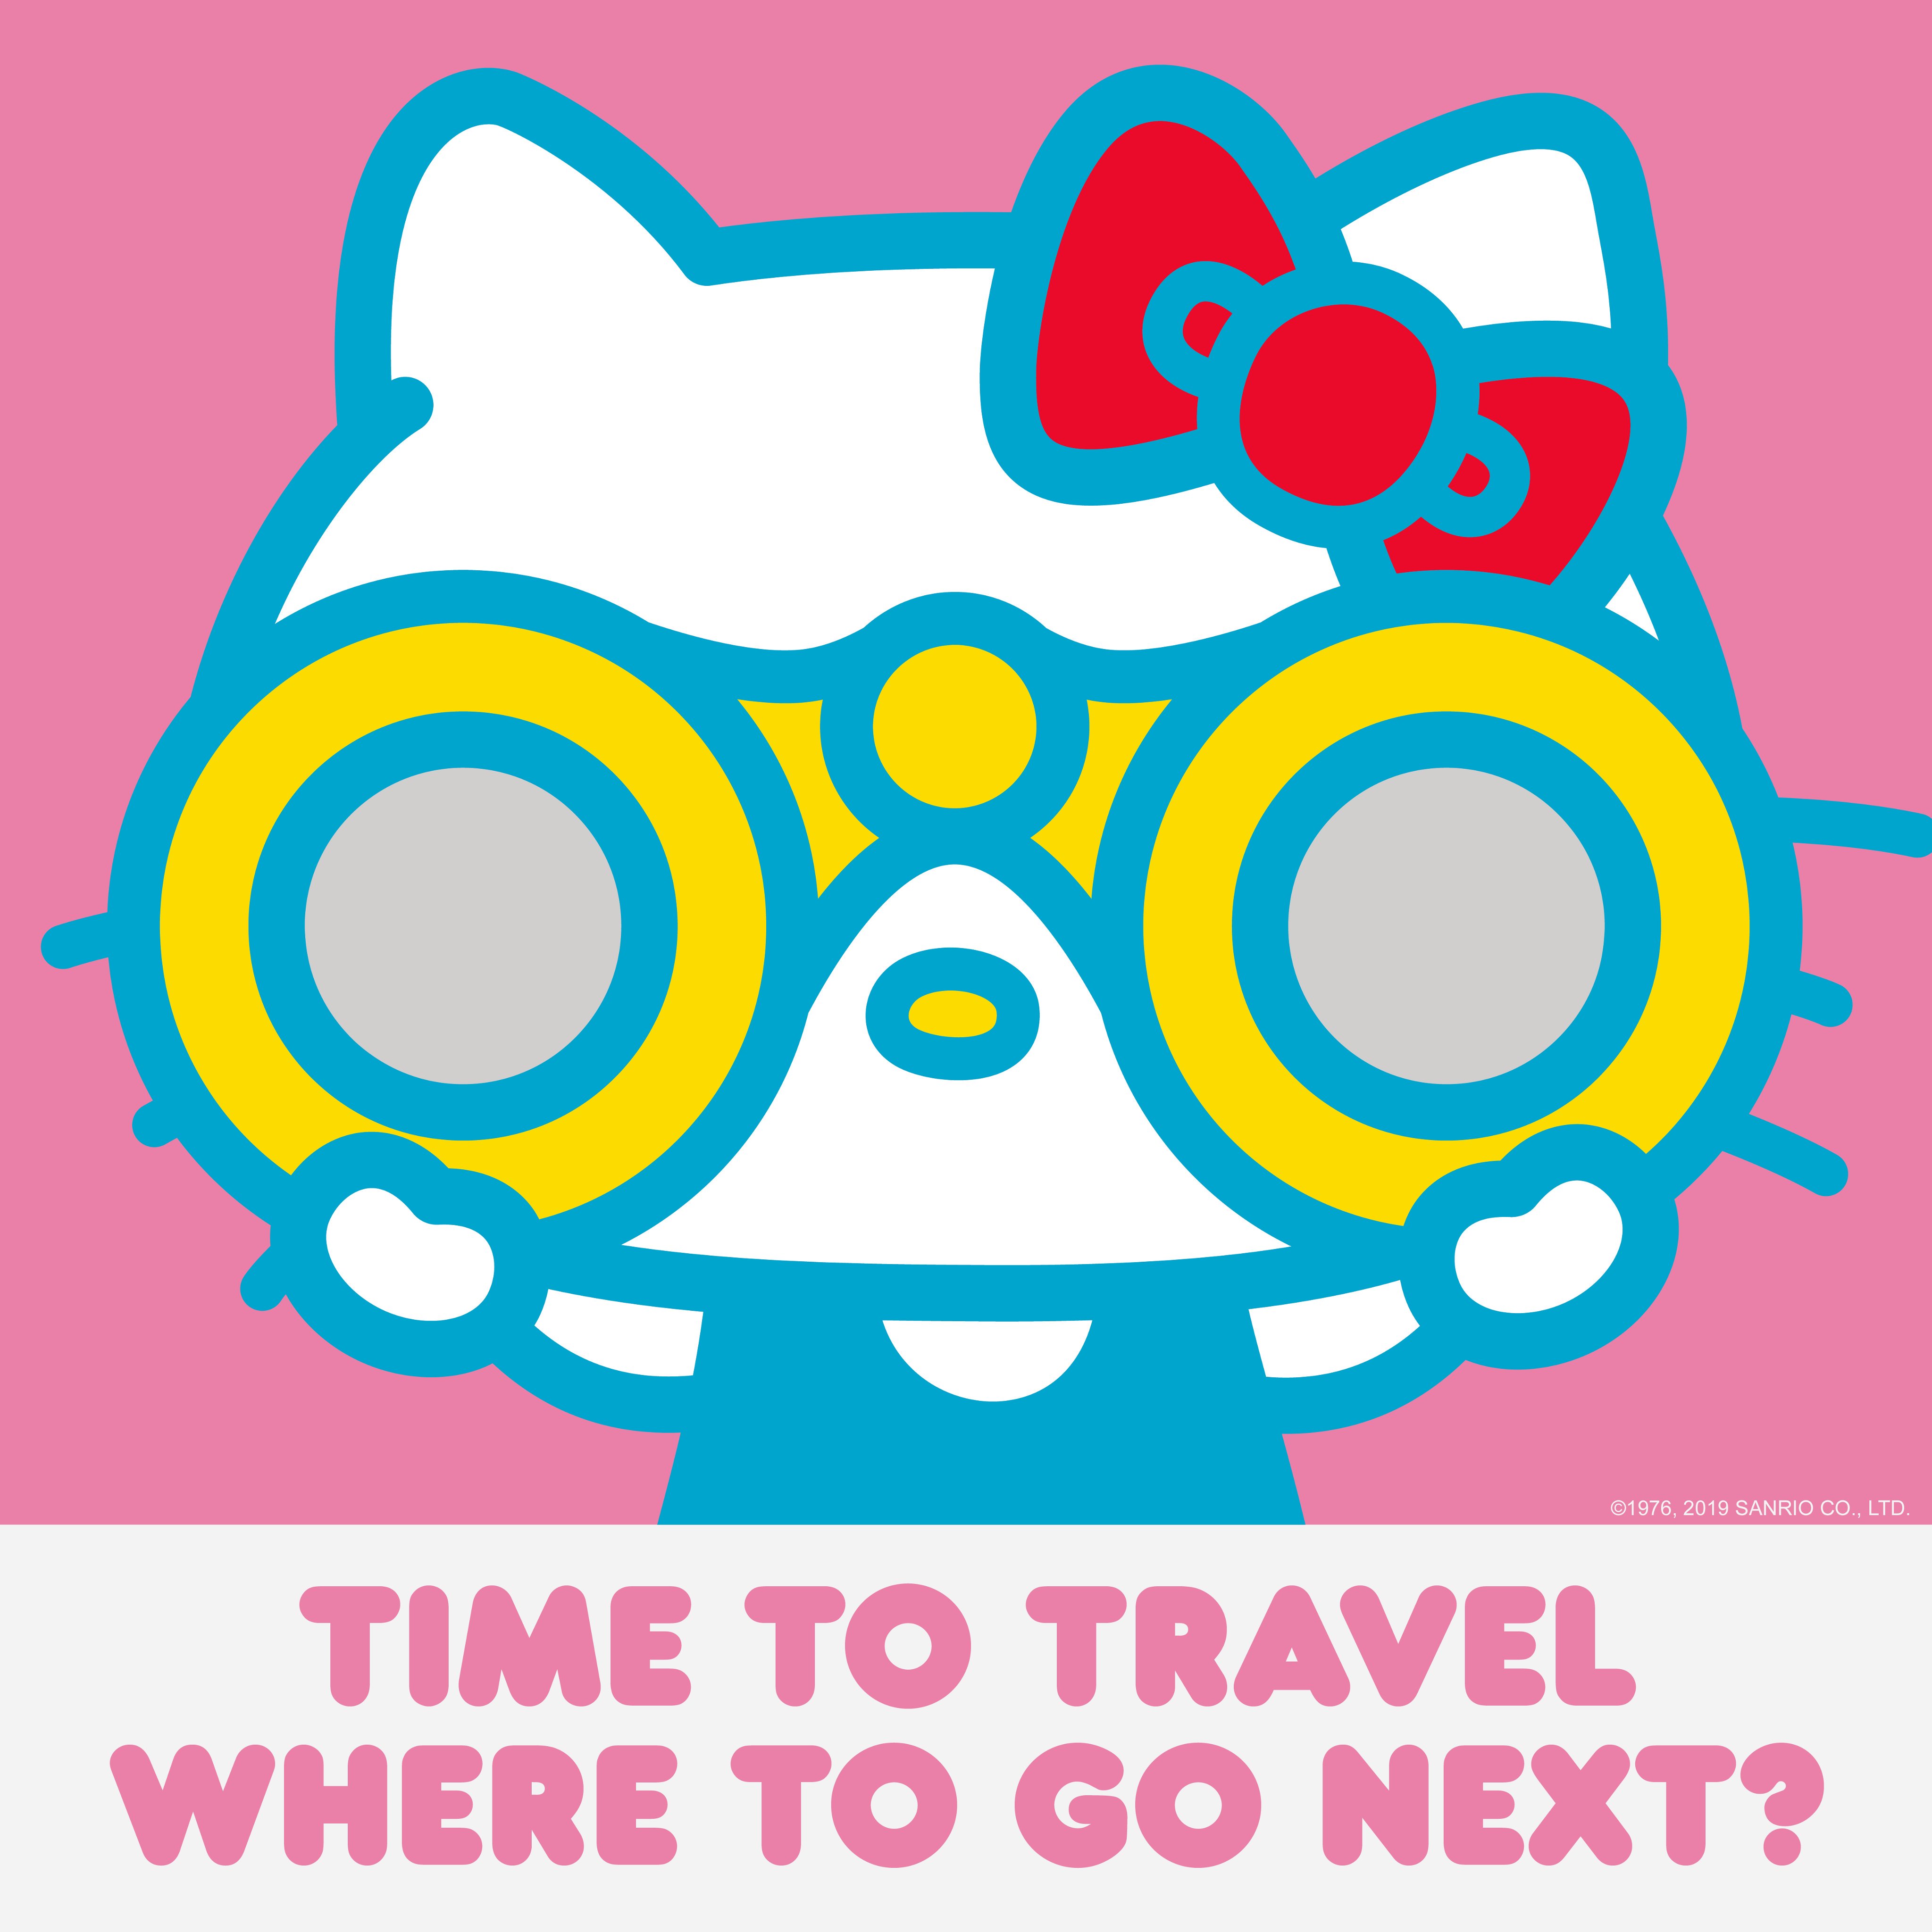 Hello Kitty on Twitter: "Today is the last day of Hello Kitty Friends Around The World Tour ✈️ in Los Angeles. Where should pop-up next? 🌈✨#HelloKitty45 https://t.co/2iOiprw4kc" / Twitter